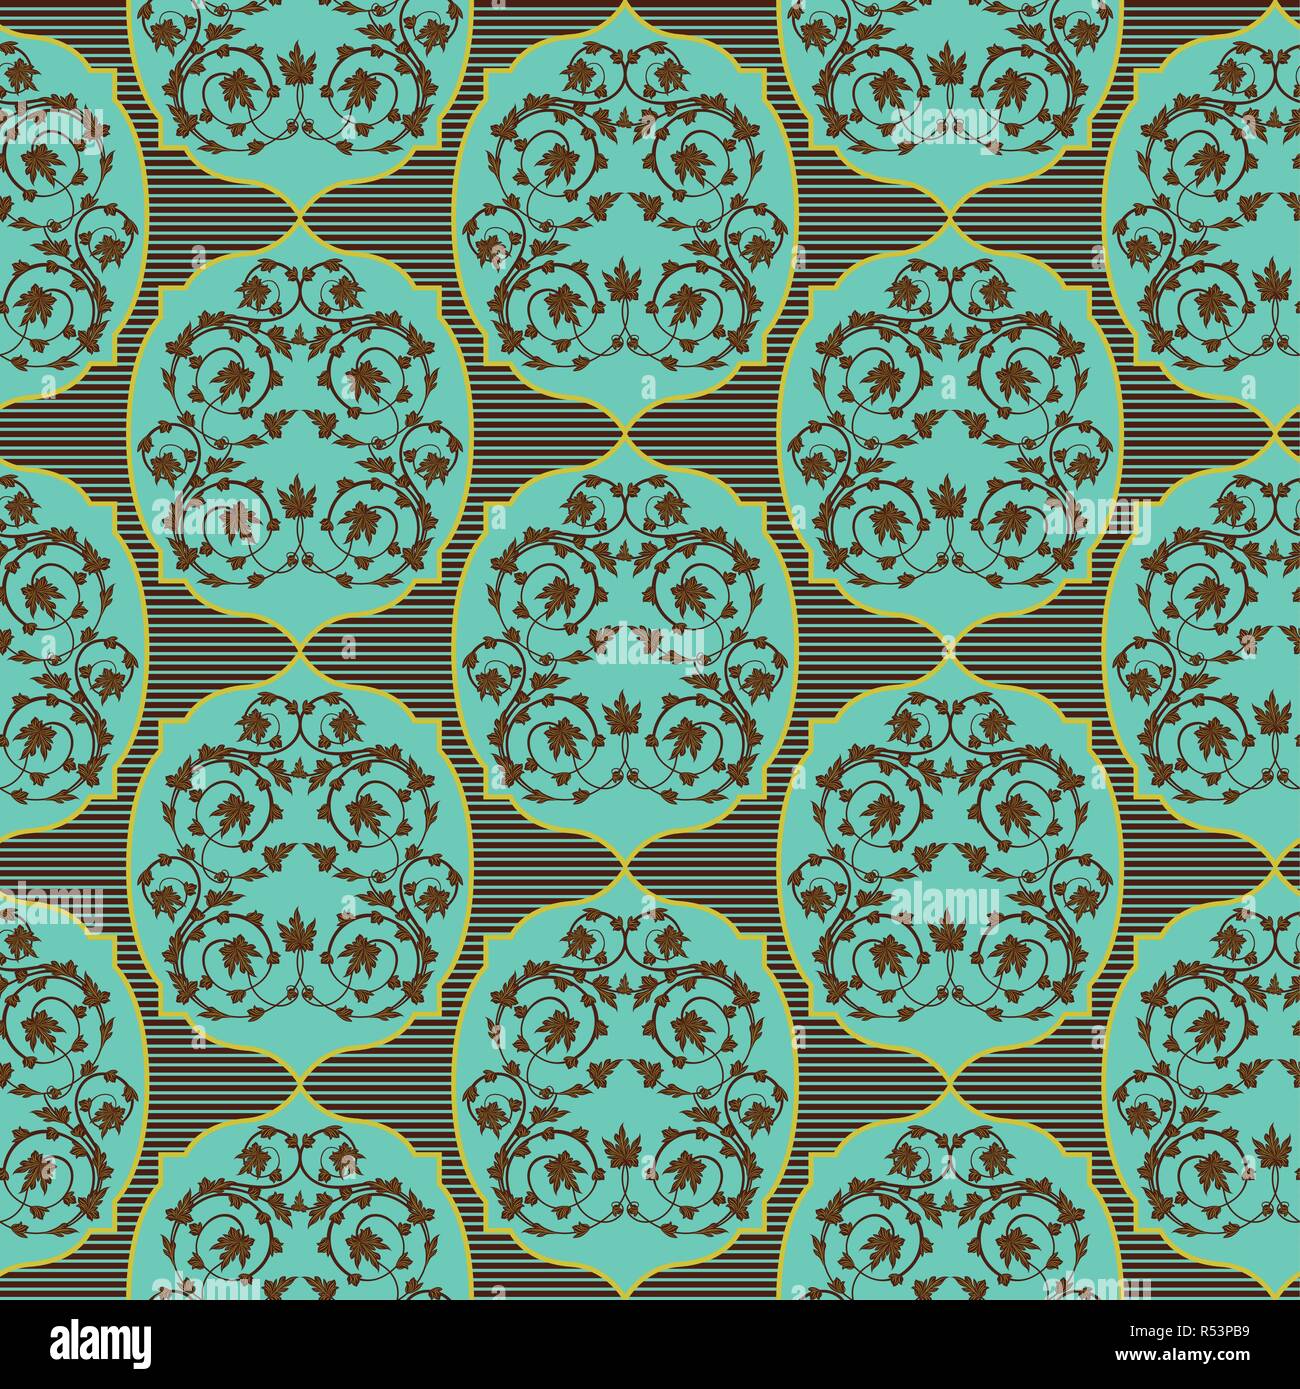 Seamless vector antique floral pattern of Victorian style in turquoise, khaki and brown hues as a fabric texture Stock Vector